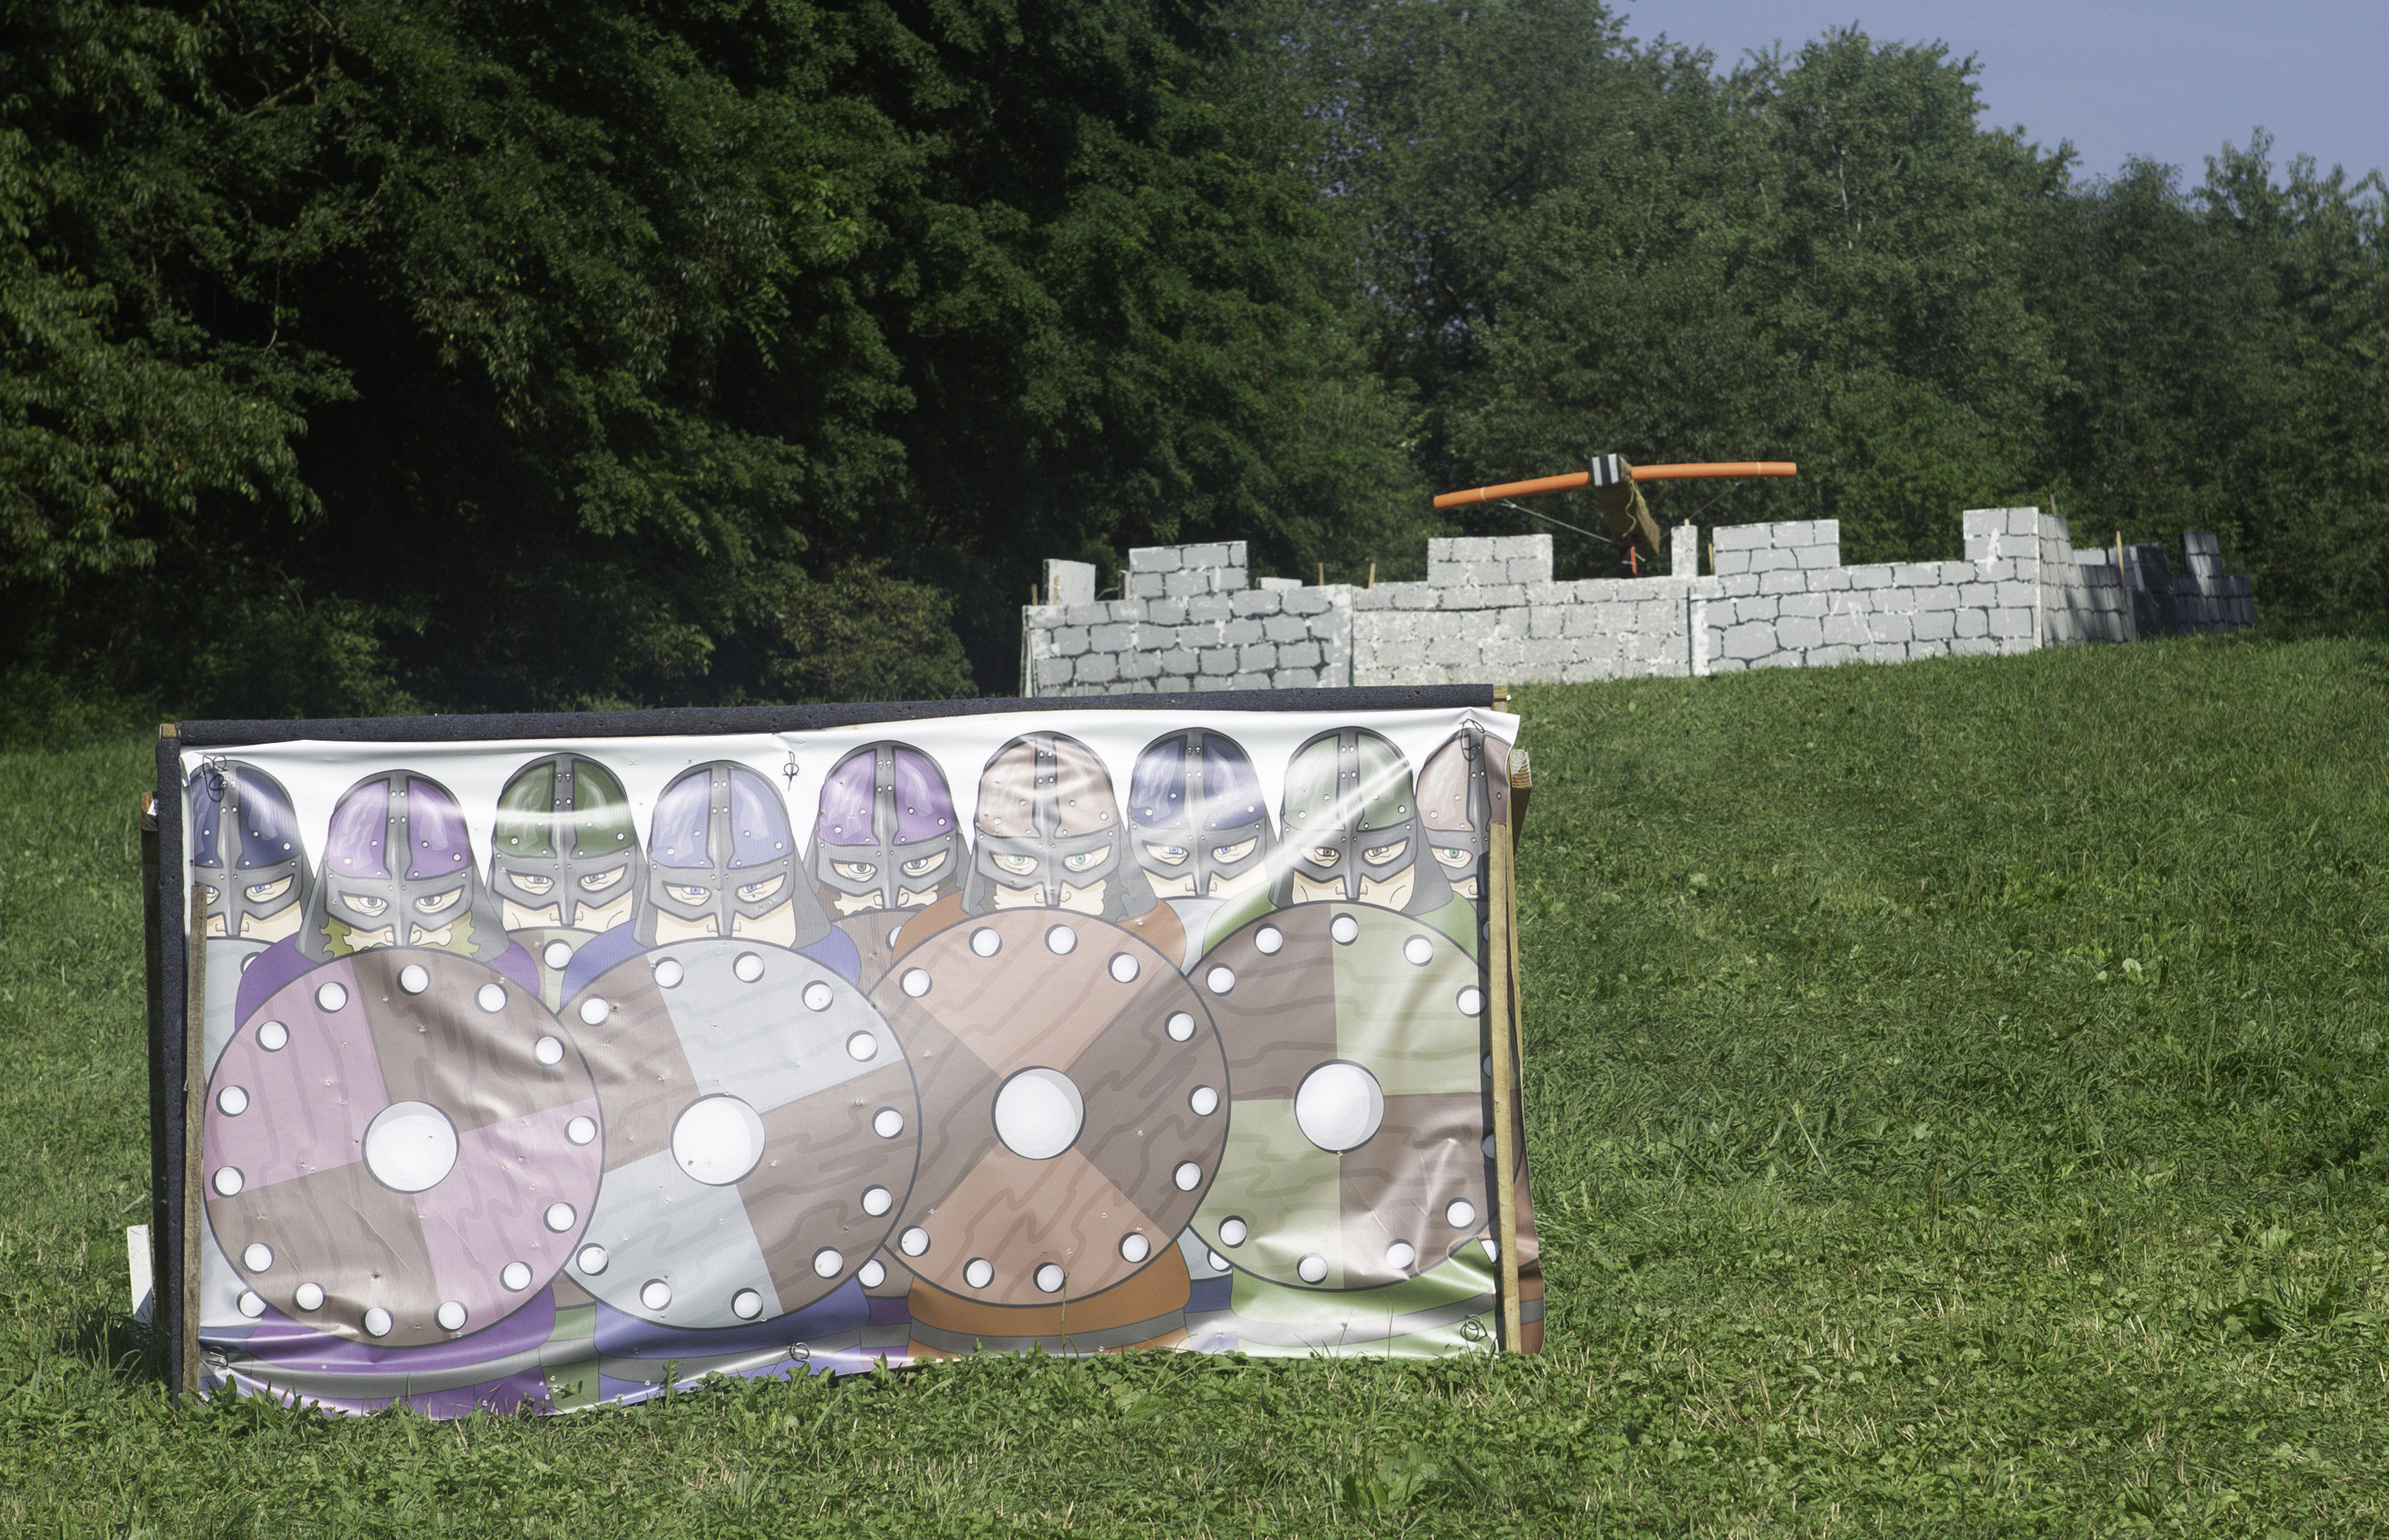 Pennsic 47 Archery - Clout Populace Target